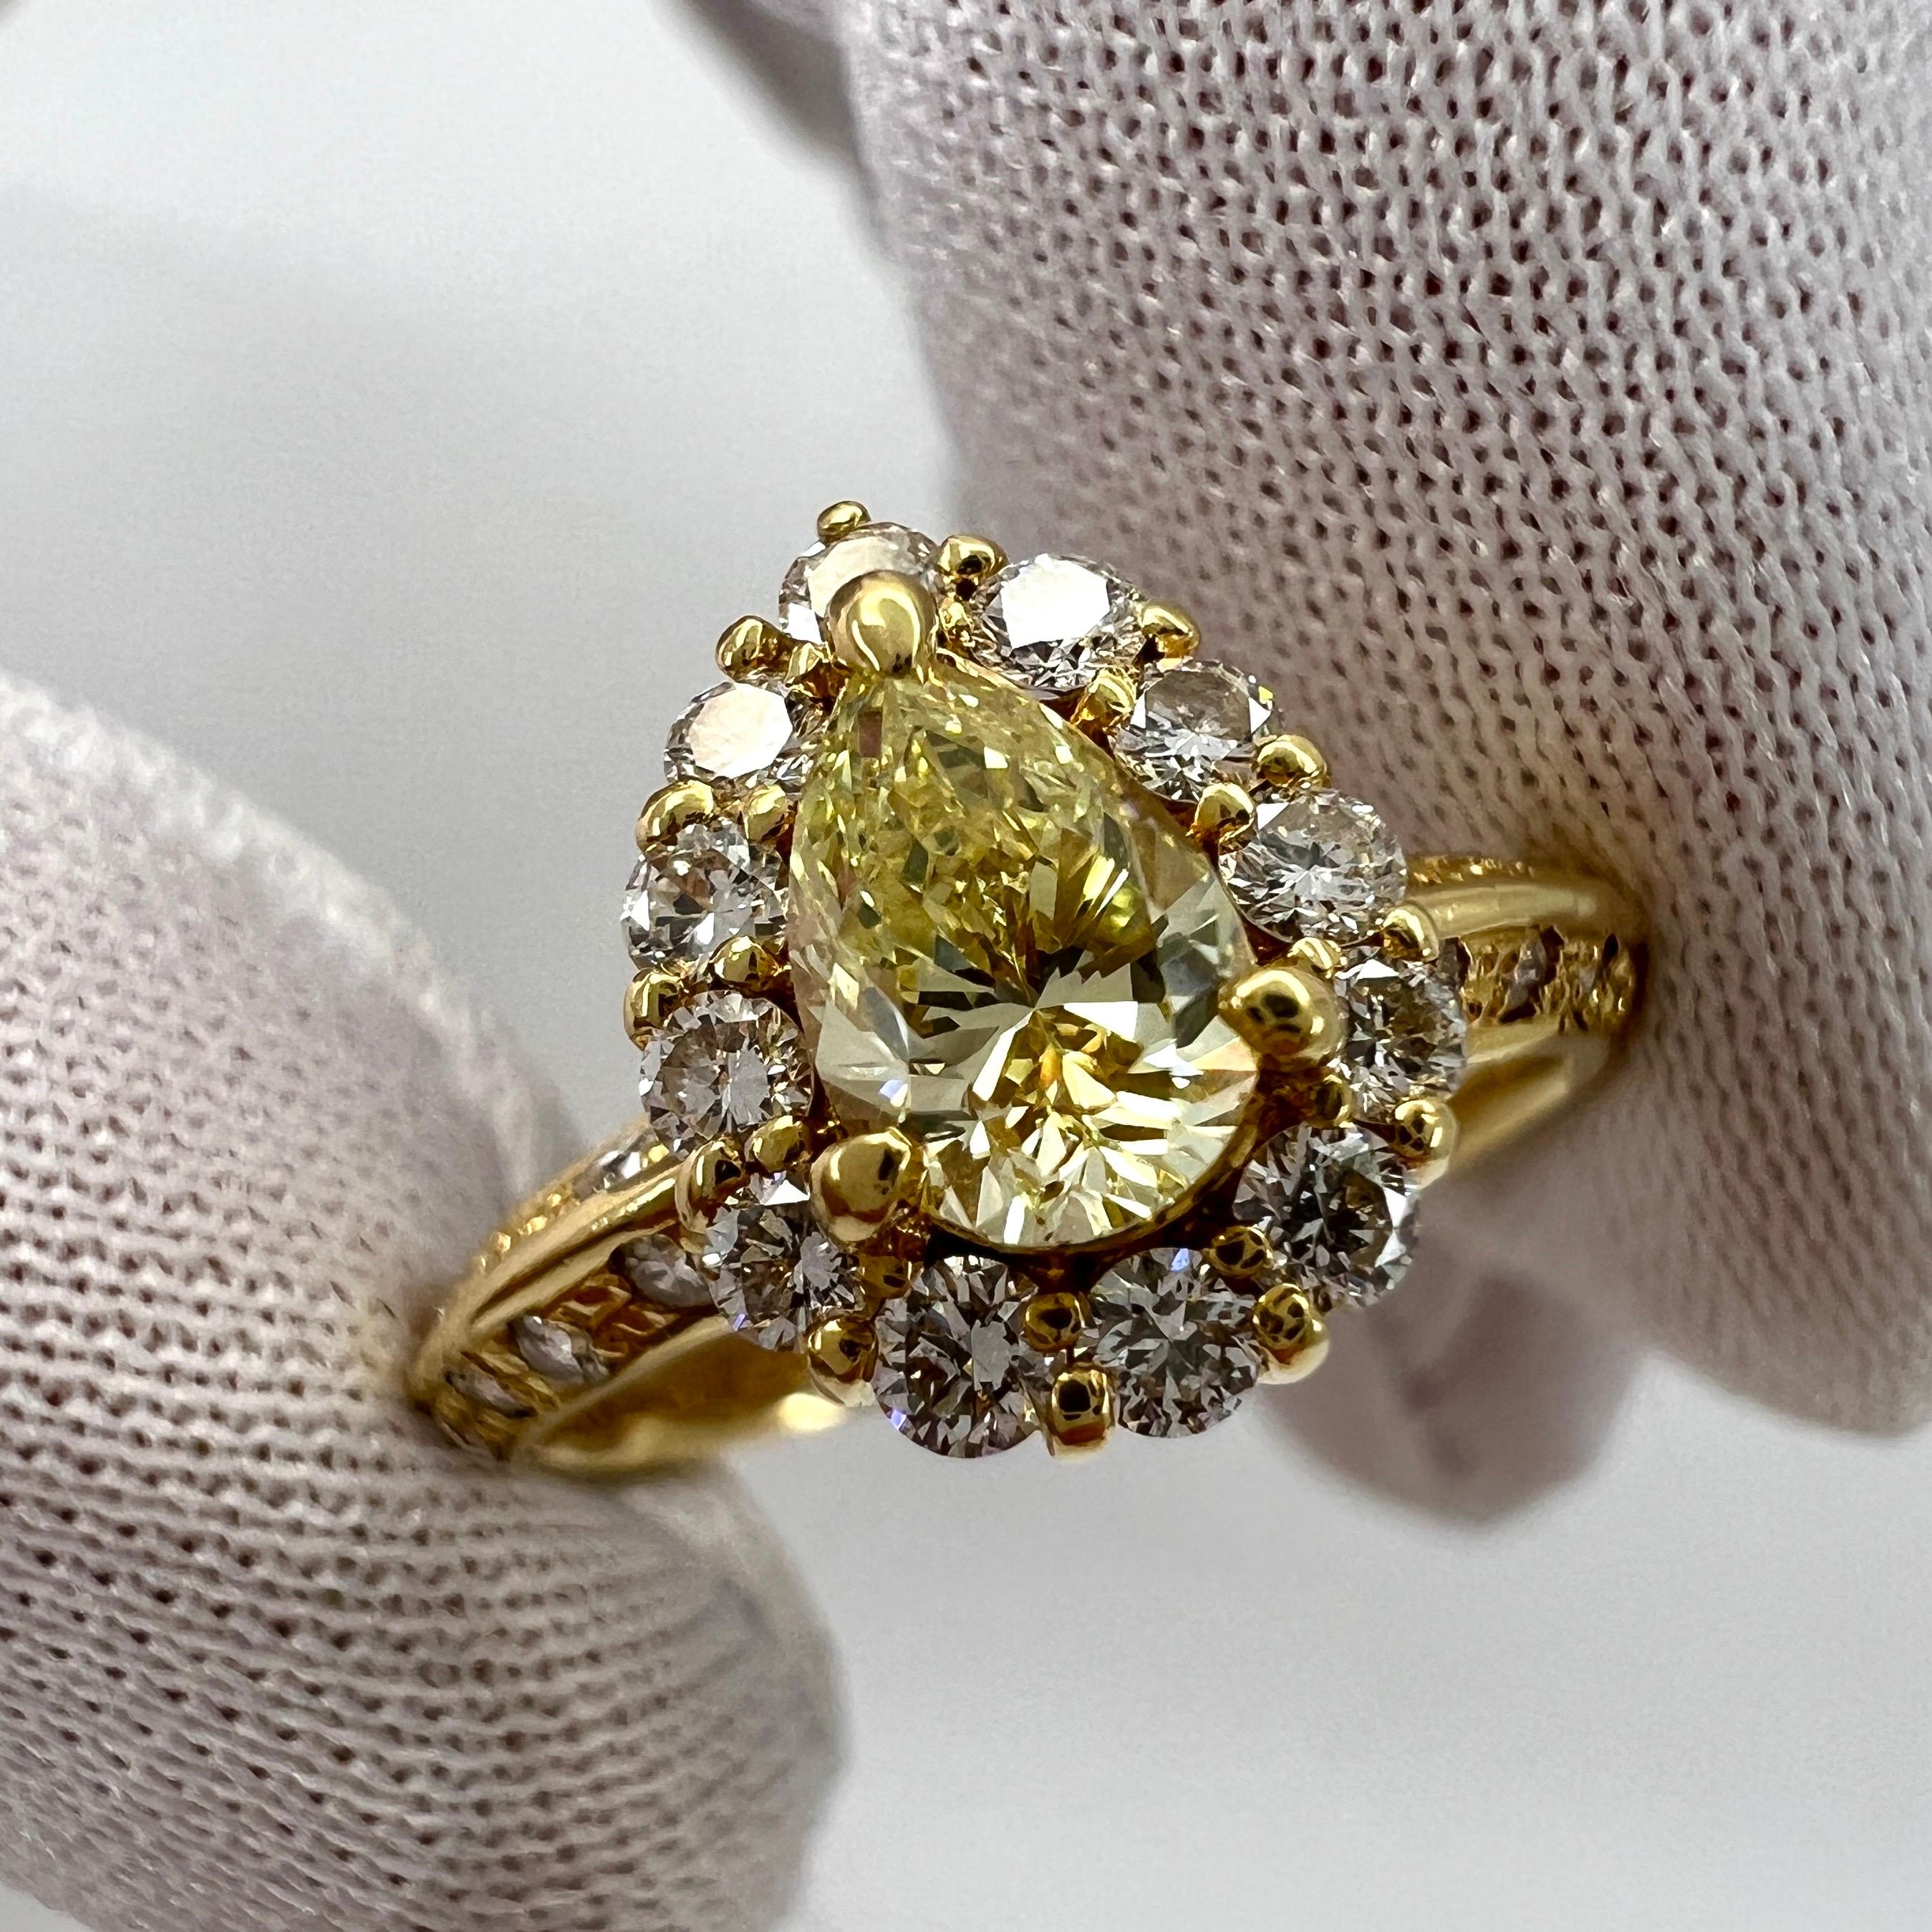 Natural Fancy Yellow Pear Cut Diamond 18k Yellow Gold Cocktail Cluster Ring.

Stunning 0.98 Total carat fancy yellow untreated diamond set in a beautiful 18k yellow gold ring. 
Centre stone is a 0.48ct natural fancy yellow diamond with an excellent